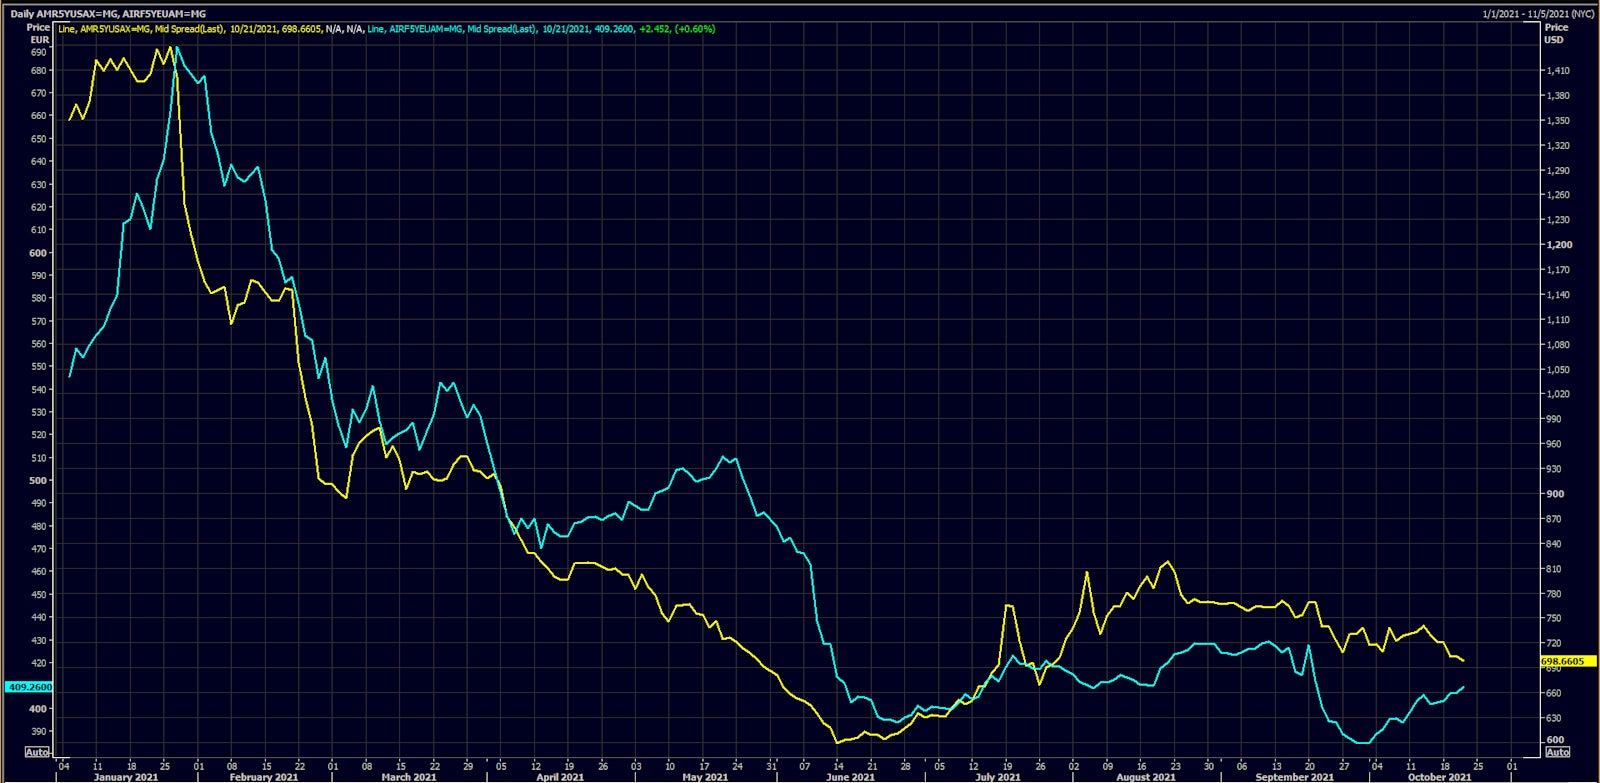 American Airlines 5Y USD CDS Spread Is Dropping, While Air France 5Y EUR CDS Spread Is Rising | Source: Refinitiv